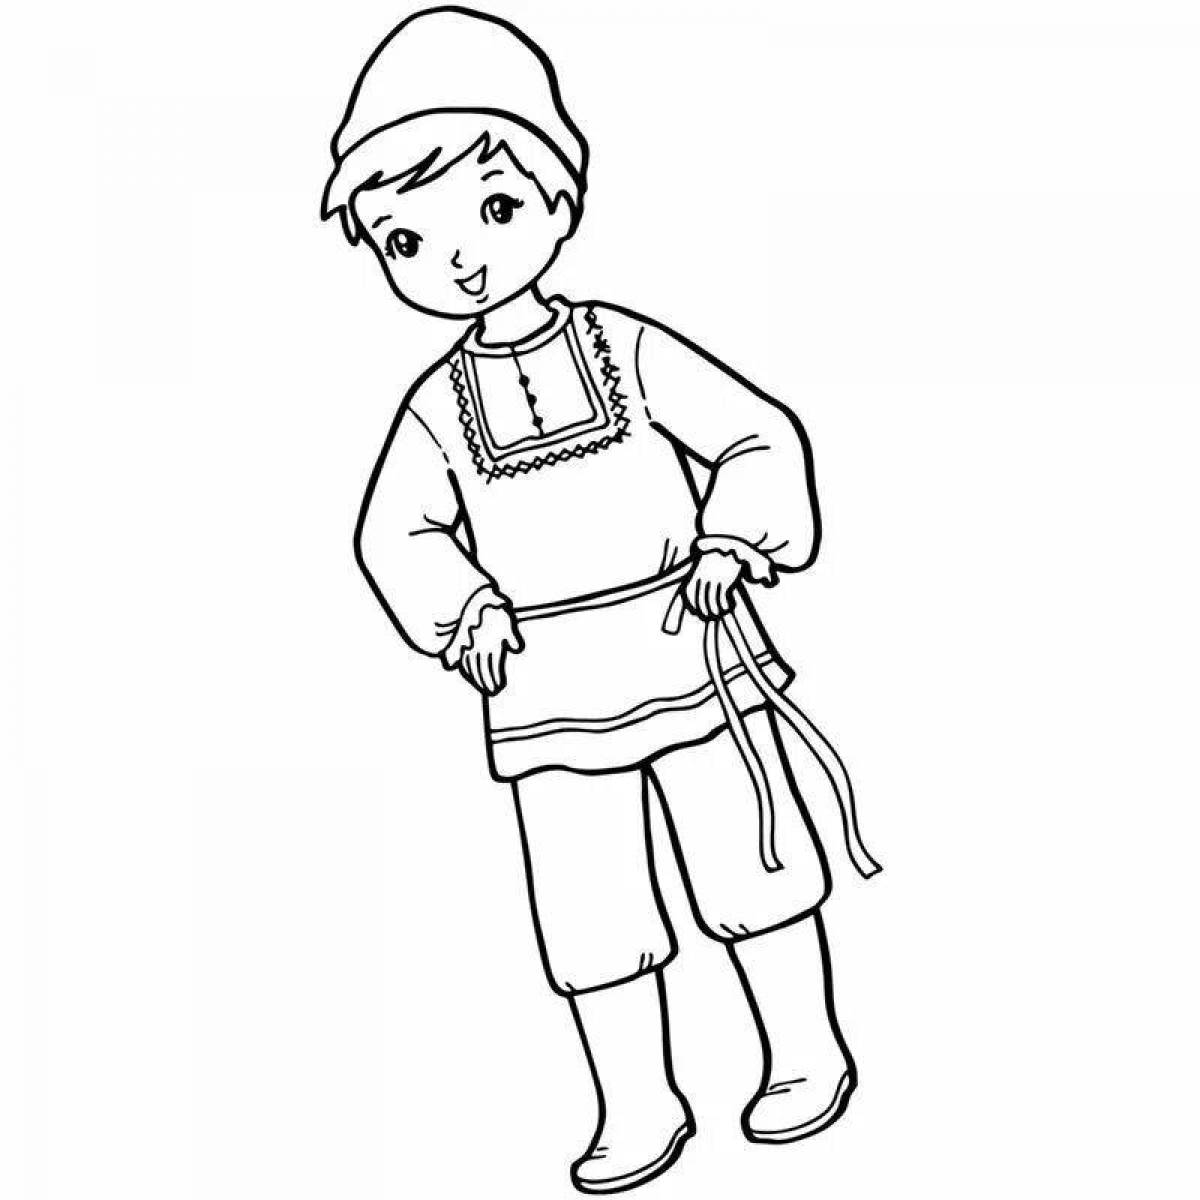 Coloring page magic russian costume